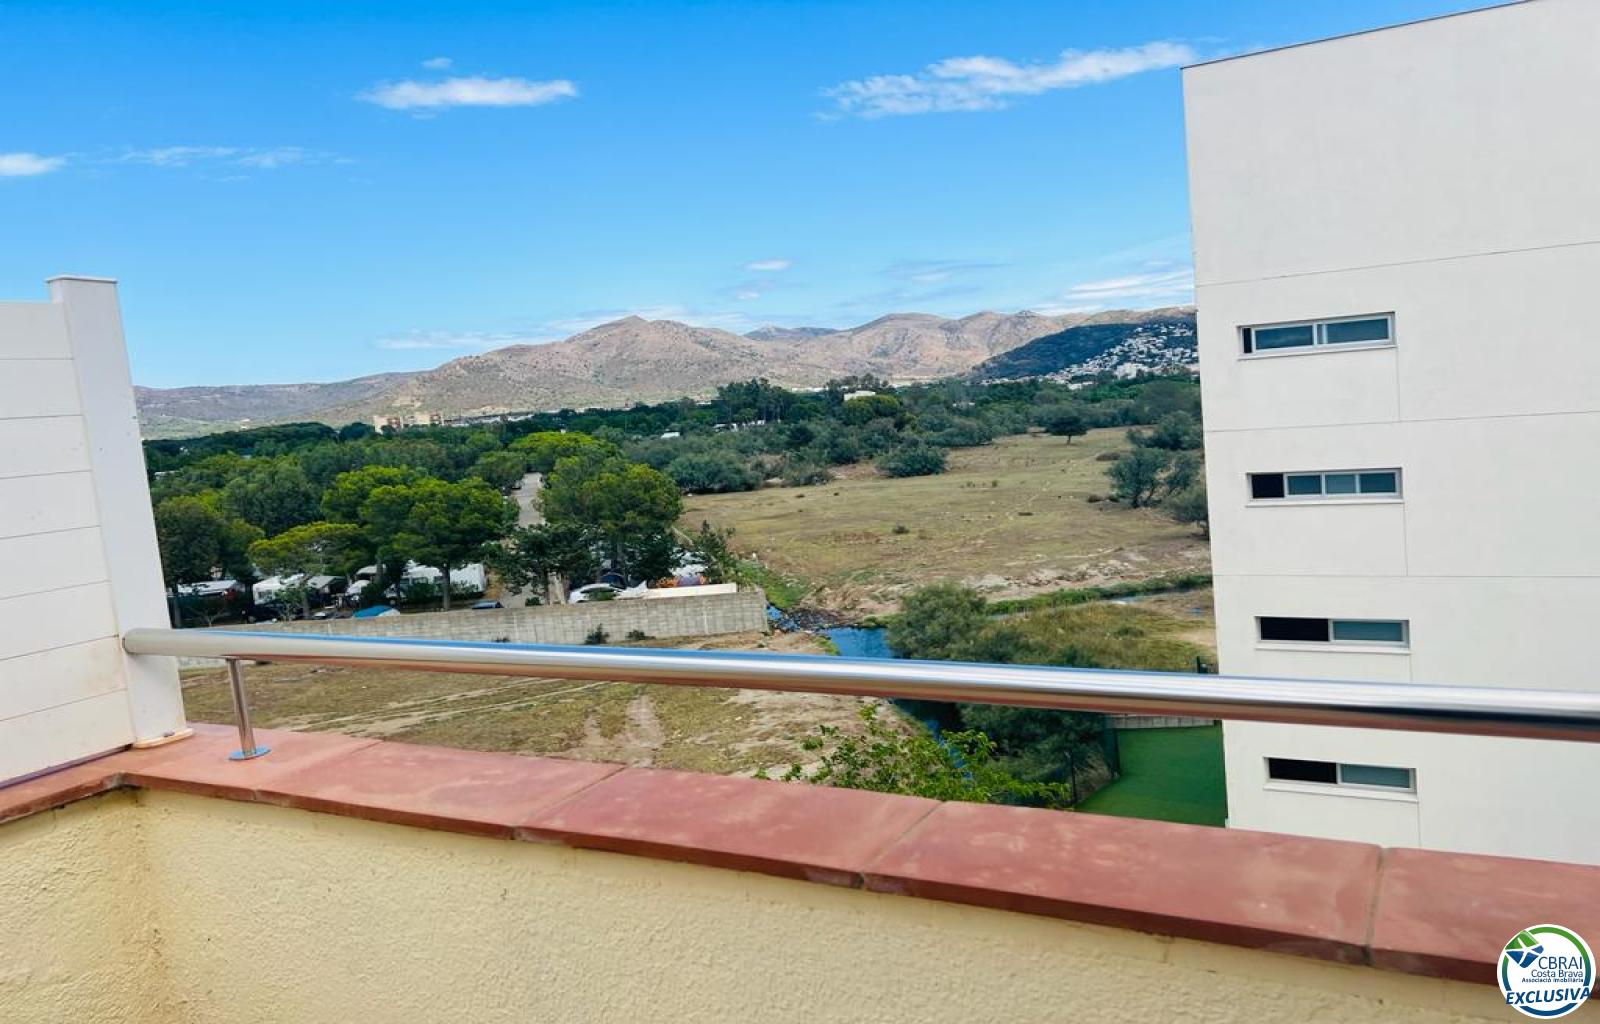 Flat - Apartment for sale in Roses, with 40 m2, 1 rooms, 1 bathroom with shower, lift, furniture and 2 terraces.